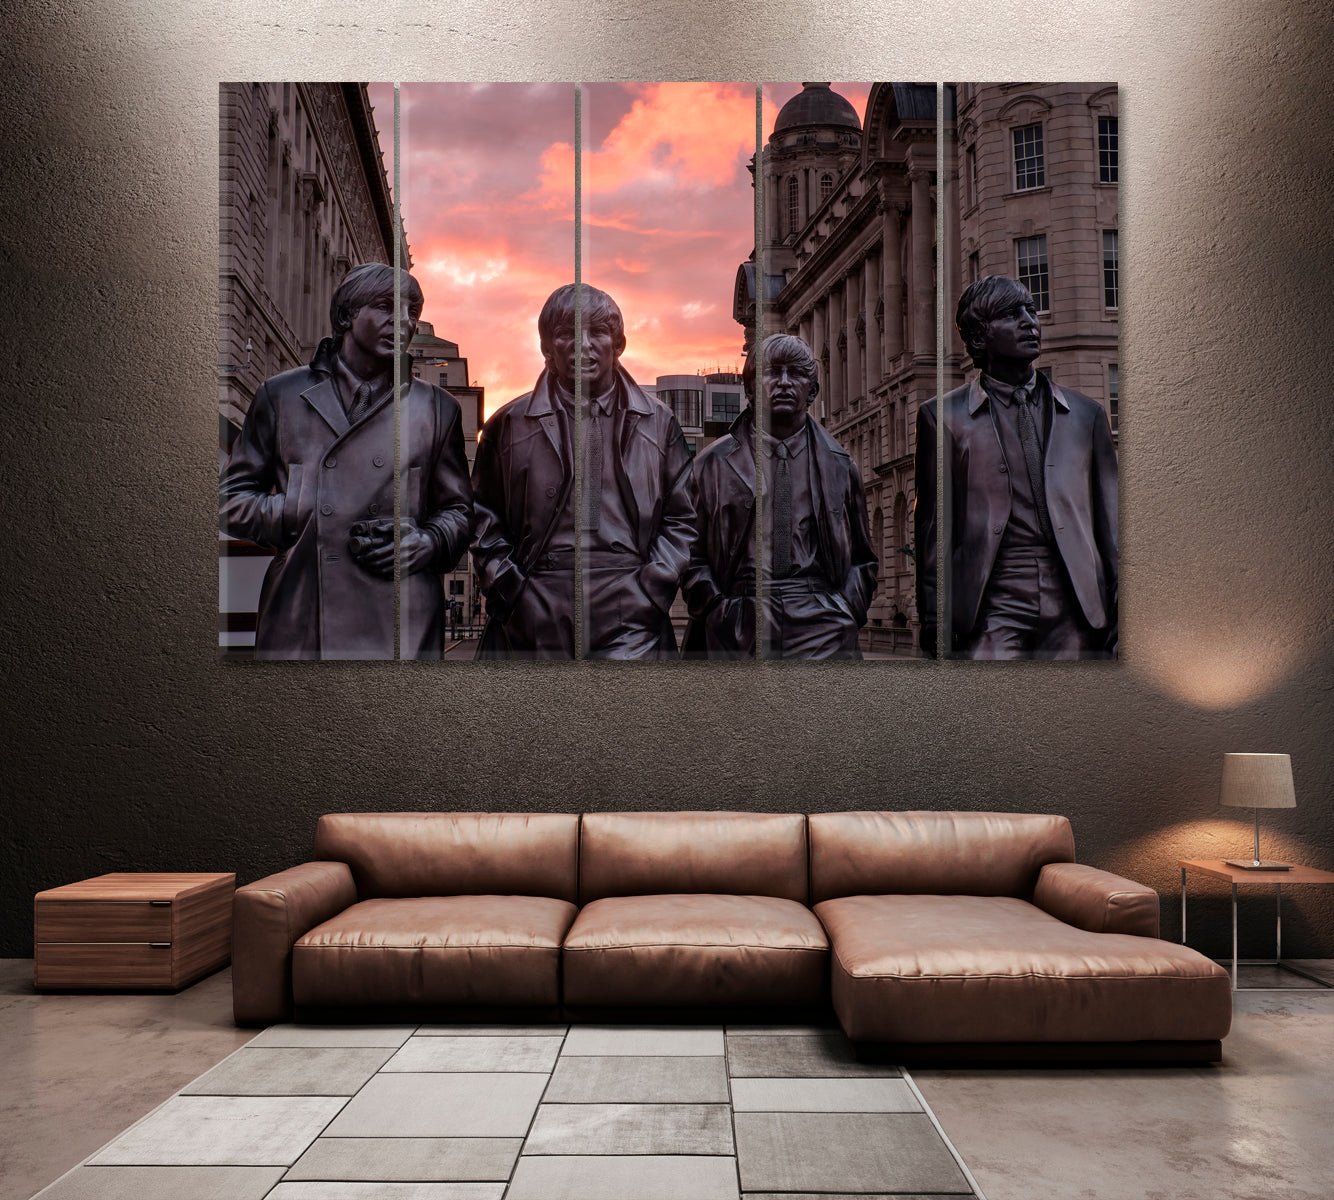 Statue of The Beatles Liverpool Canvas Print ArtLexy 5 Panels 36"x24" inches 